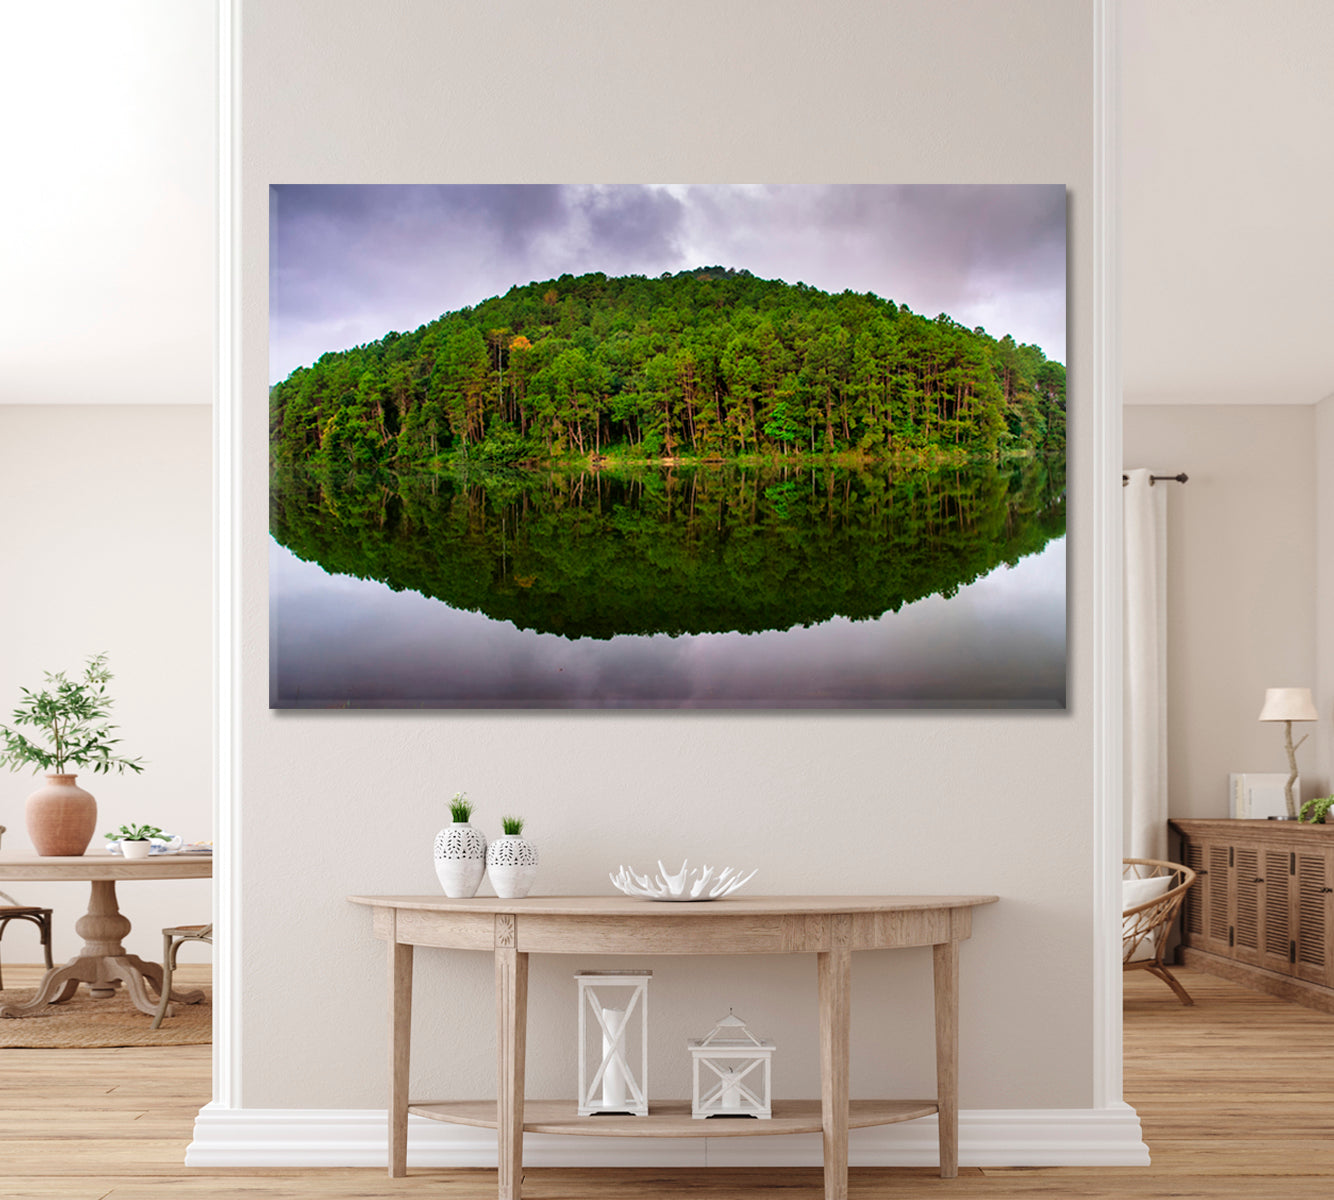 AMAZING Nature Reflection of pine tree in a lake, Thailand Pang Ung Hidden Treasures Scenery Landscape Fine Art Print Artesty   